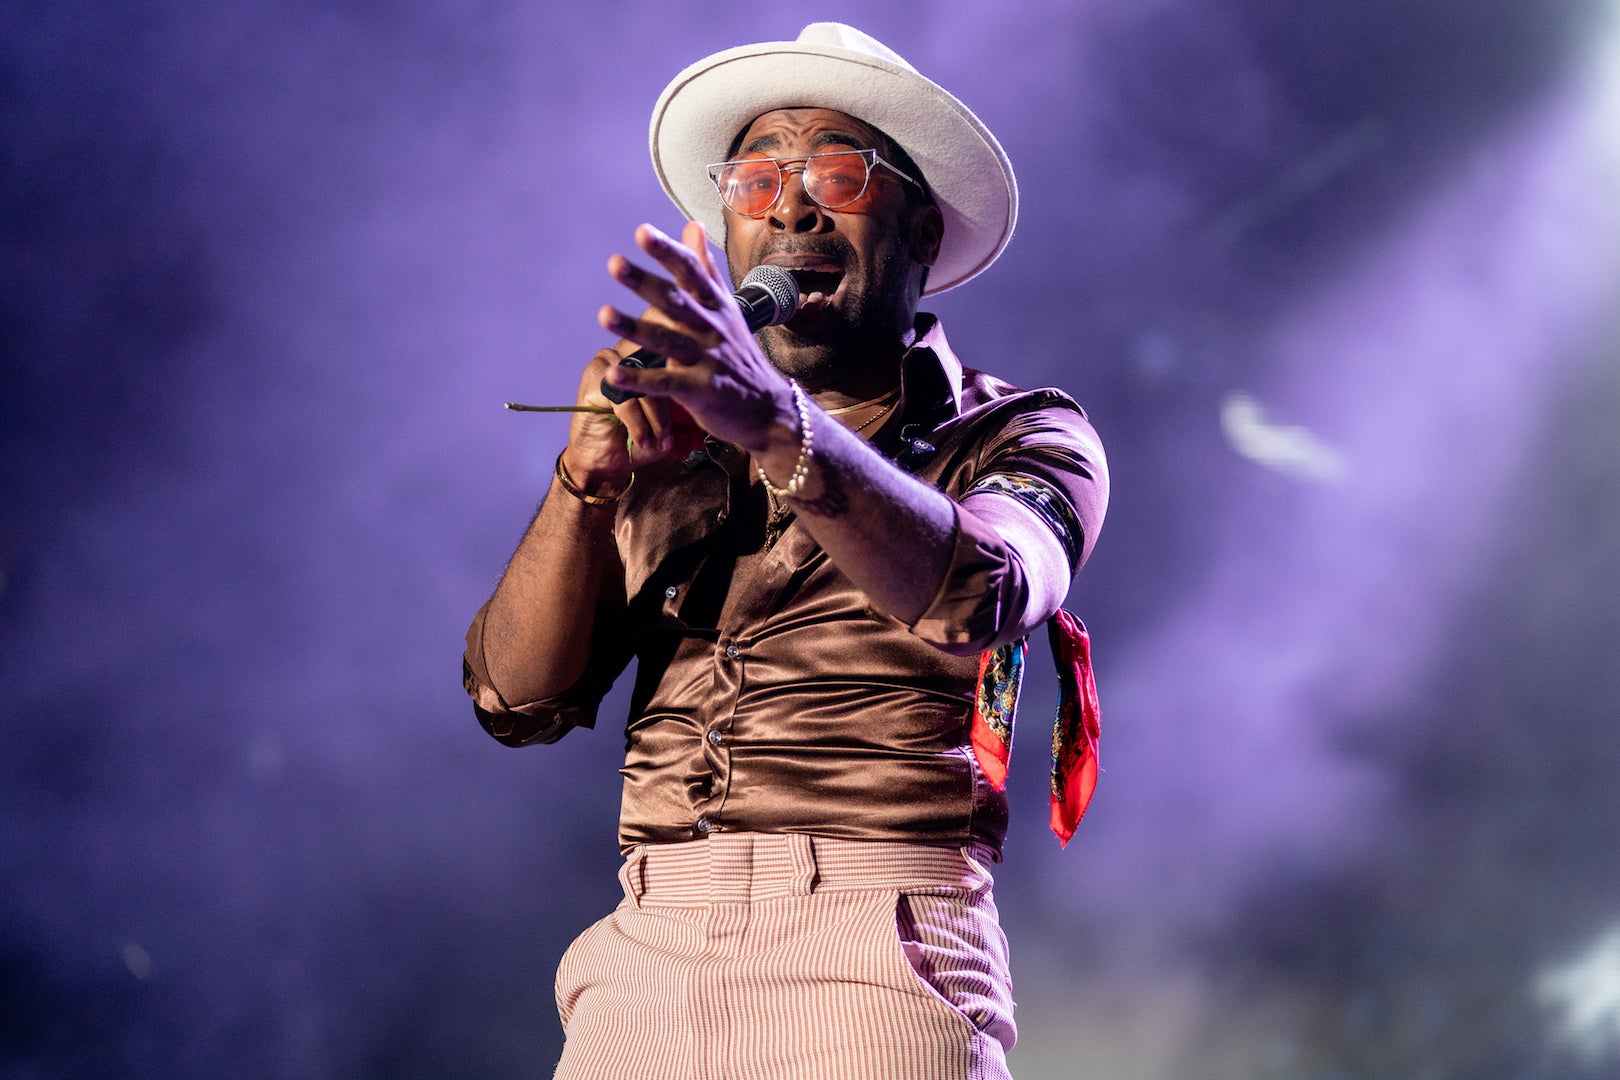 Teddy Riley's Star-Studded Essence Fest Performance Was One For The Books